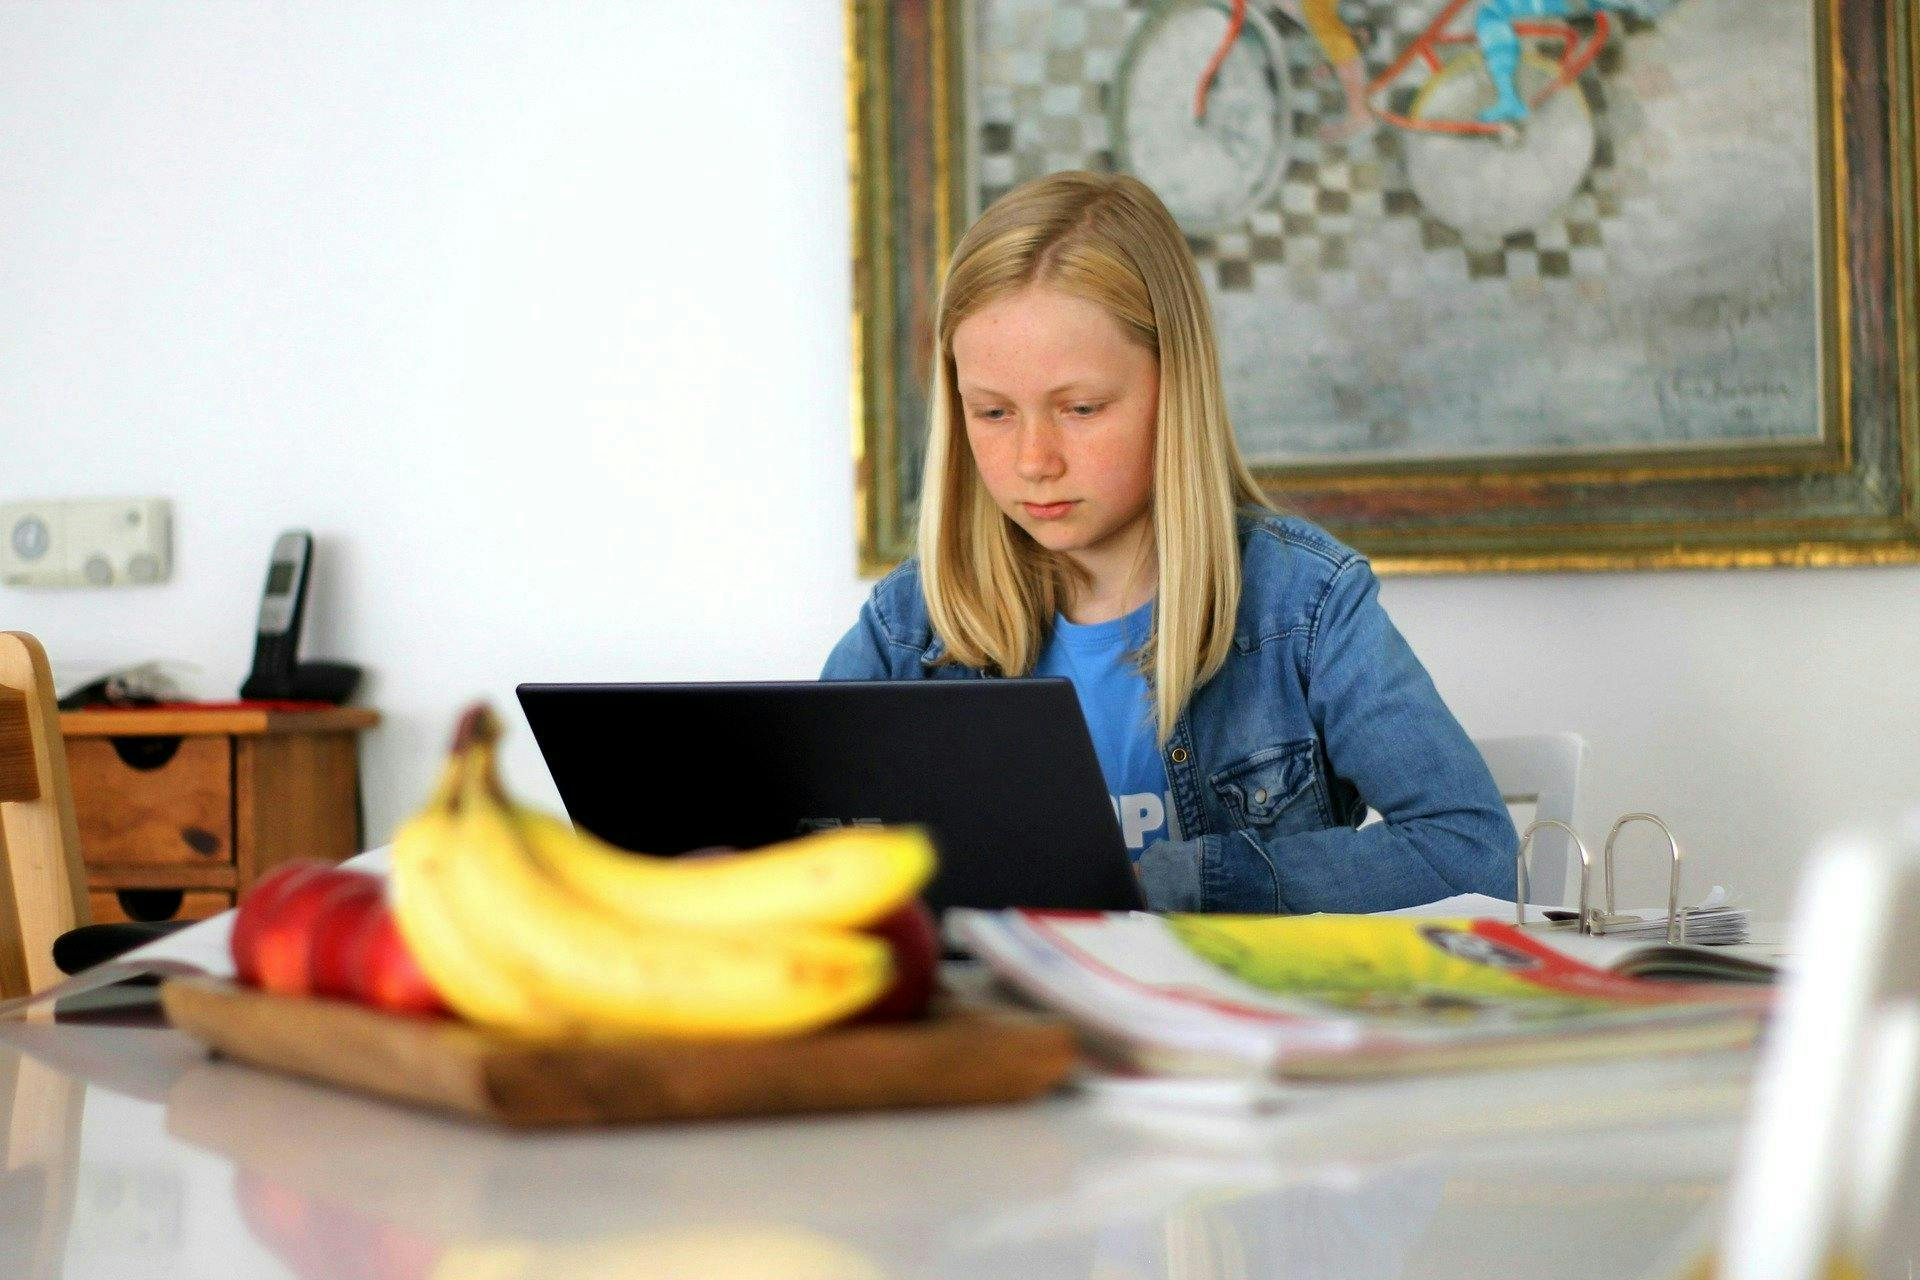 A girl works on a laptop at a white table, with bananas, a phone, and assorted papers nearby, in a room decorated with a colorful bicycle painting.